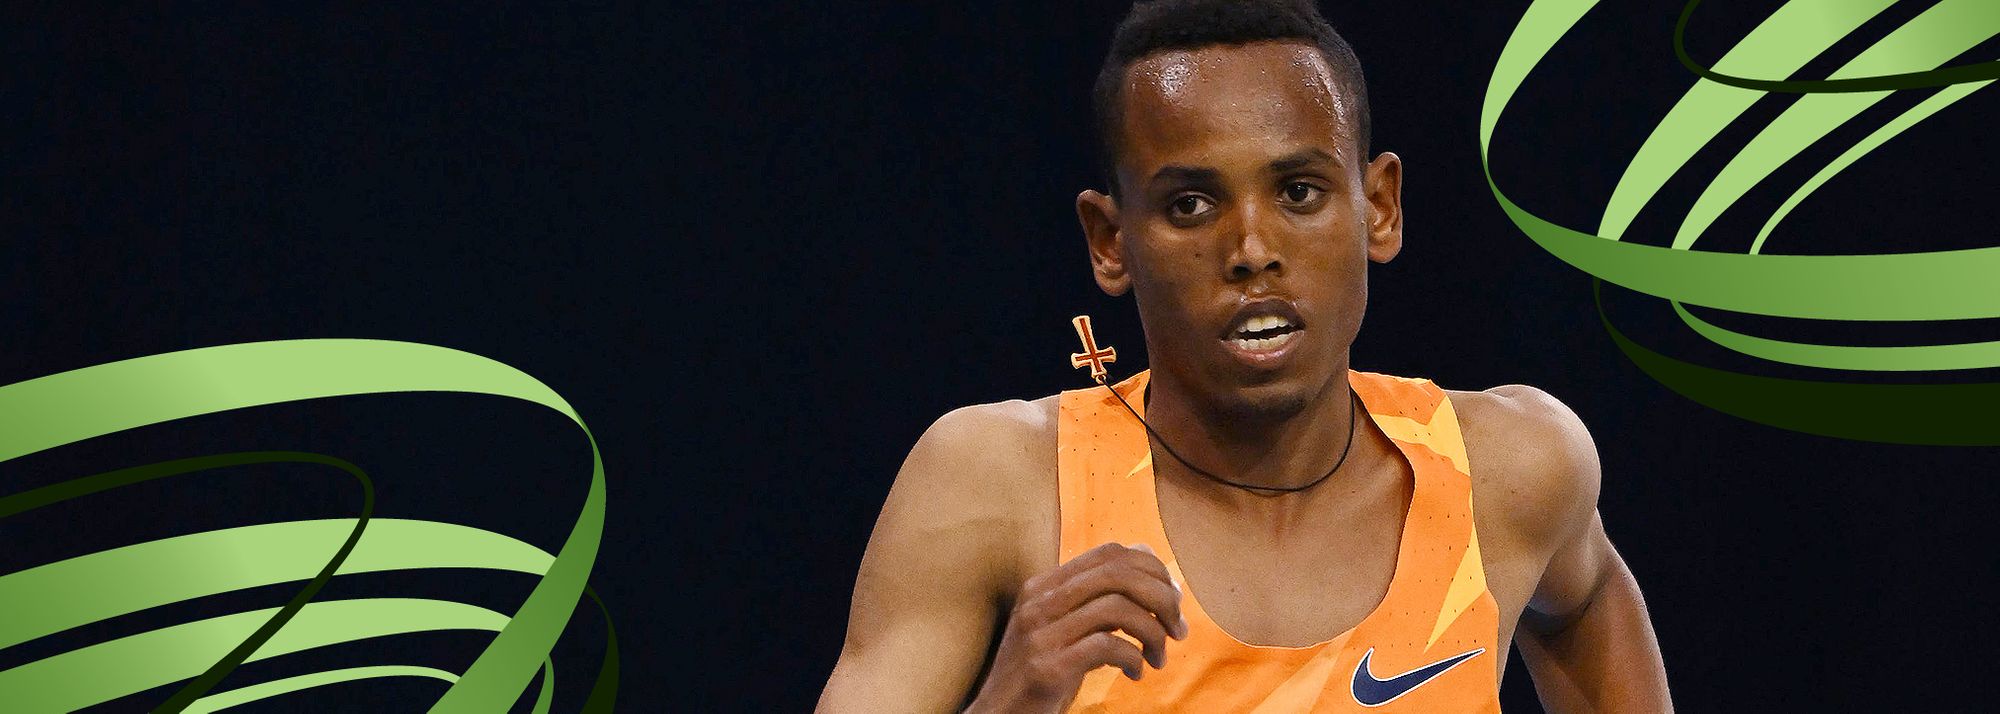 Berihu Aregawi runs 7:26.20 for 3000m, moving to fifth on the world indoor all-time list